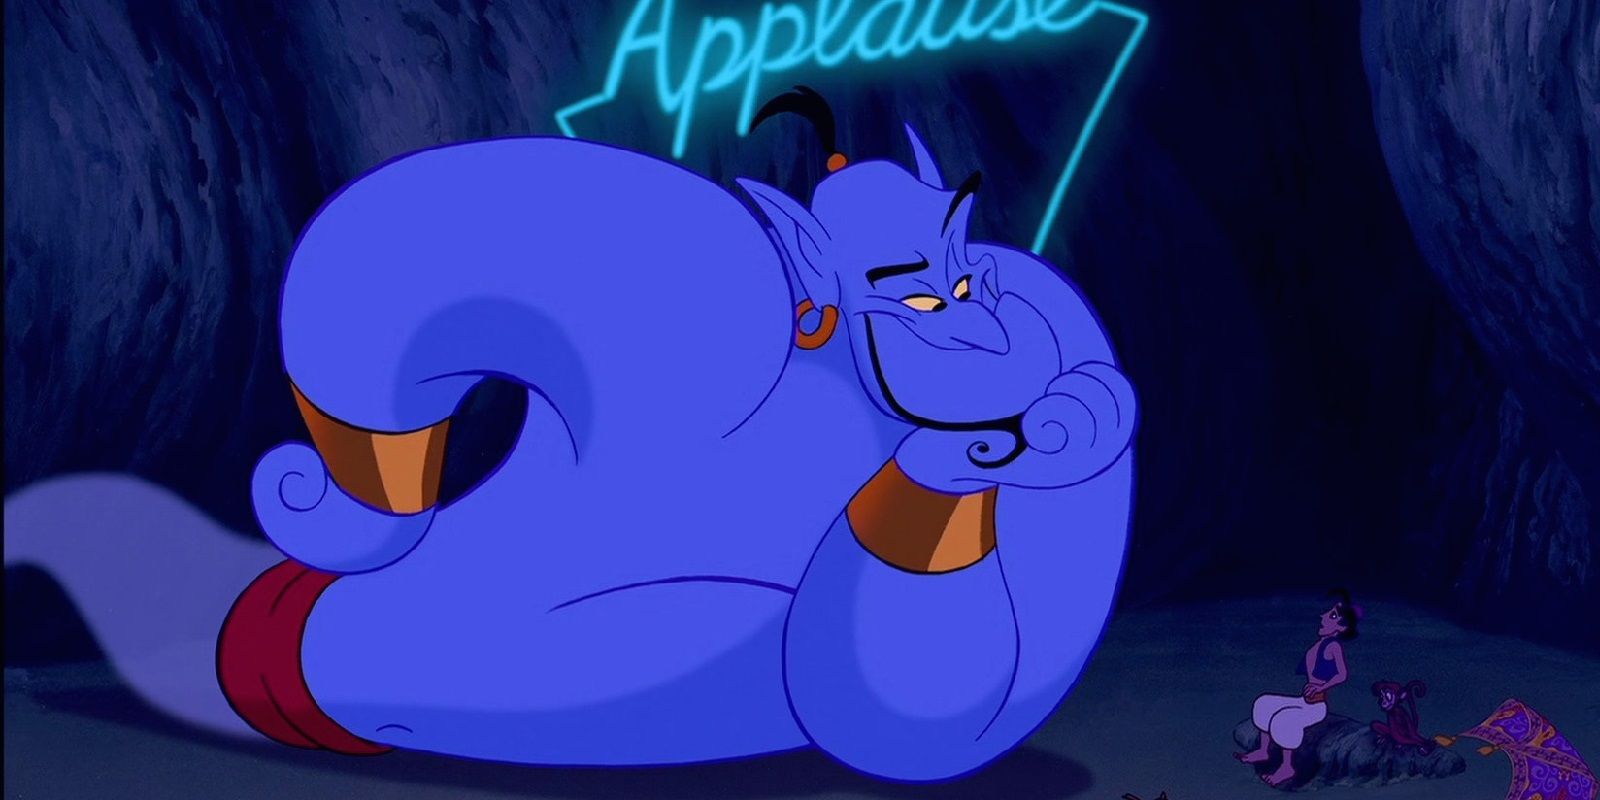 The Genie holding the applause sign in Aladdin